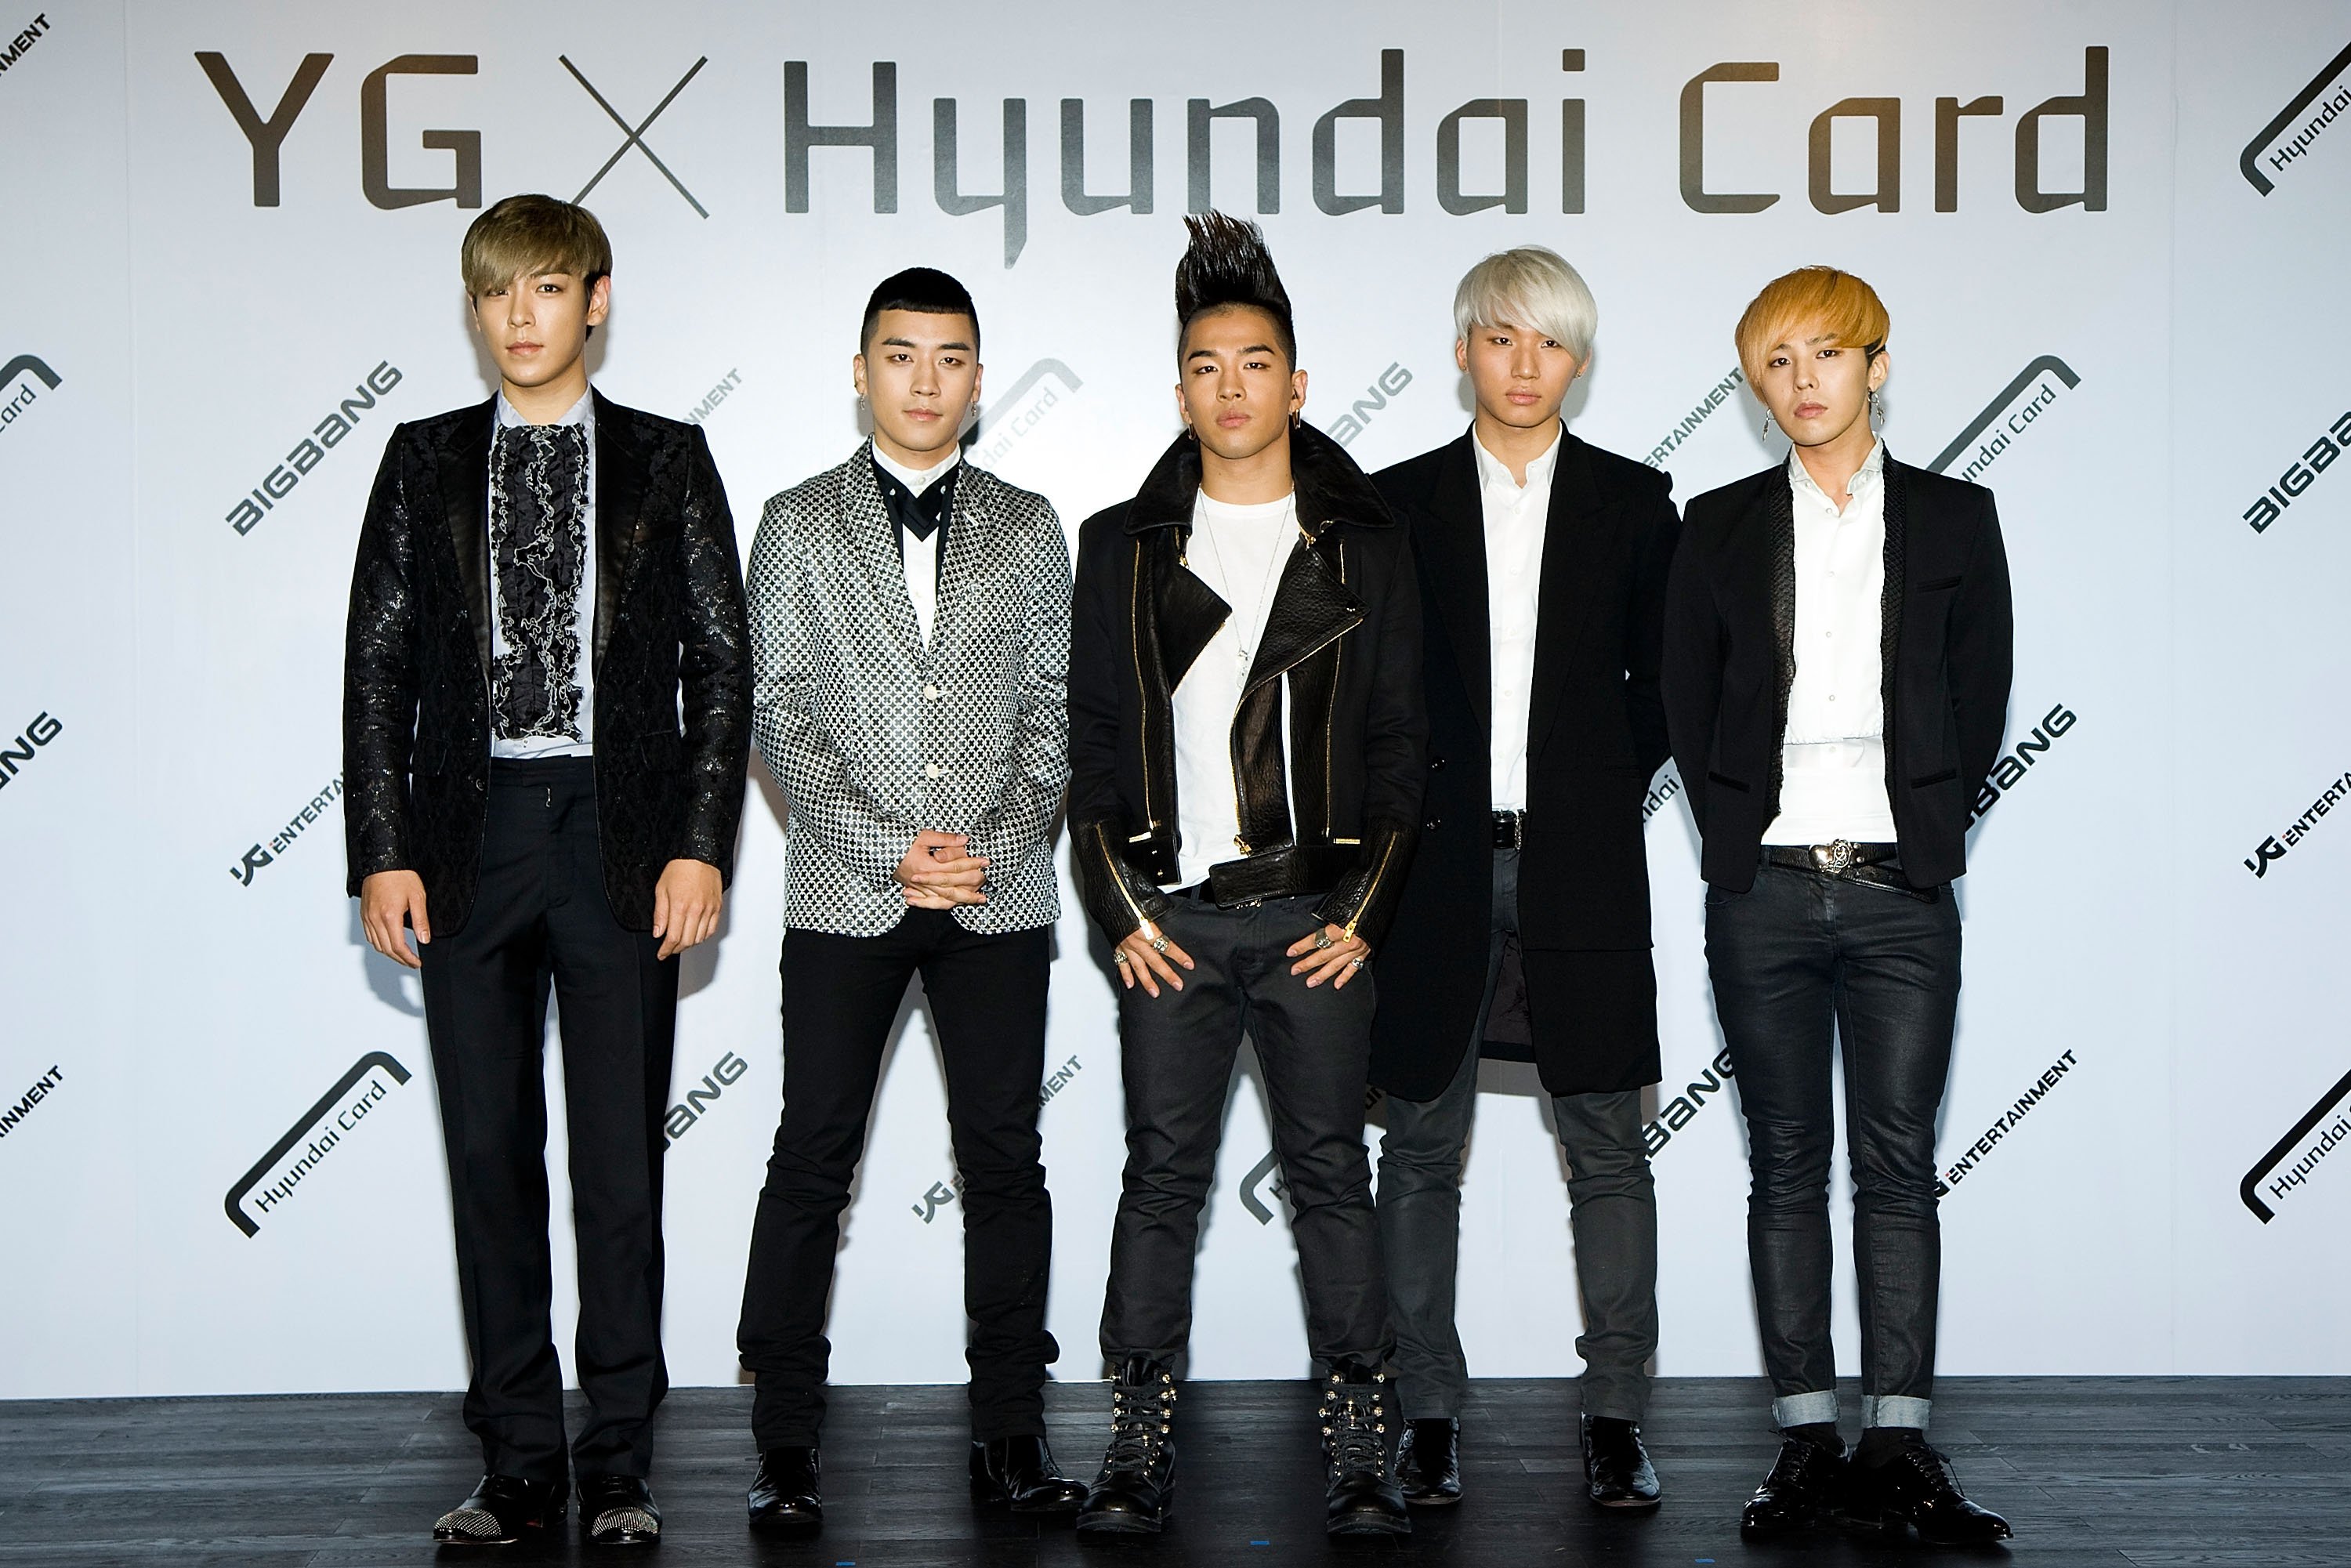 T.O.P, Seungri, Taeyang, Daesung, and G-Dragon of Big Bang at the Hyundai Card Collaboration with YG Entertainment on June 5, 2012, in Seoul, South Korea | Photo: Han Myung-Gu/WireImage/Getty Images